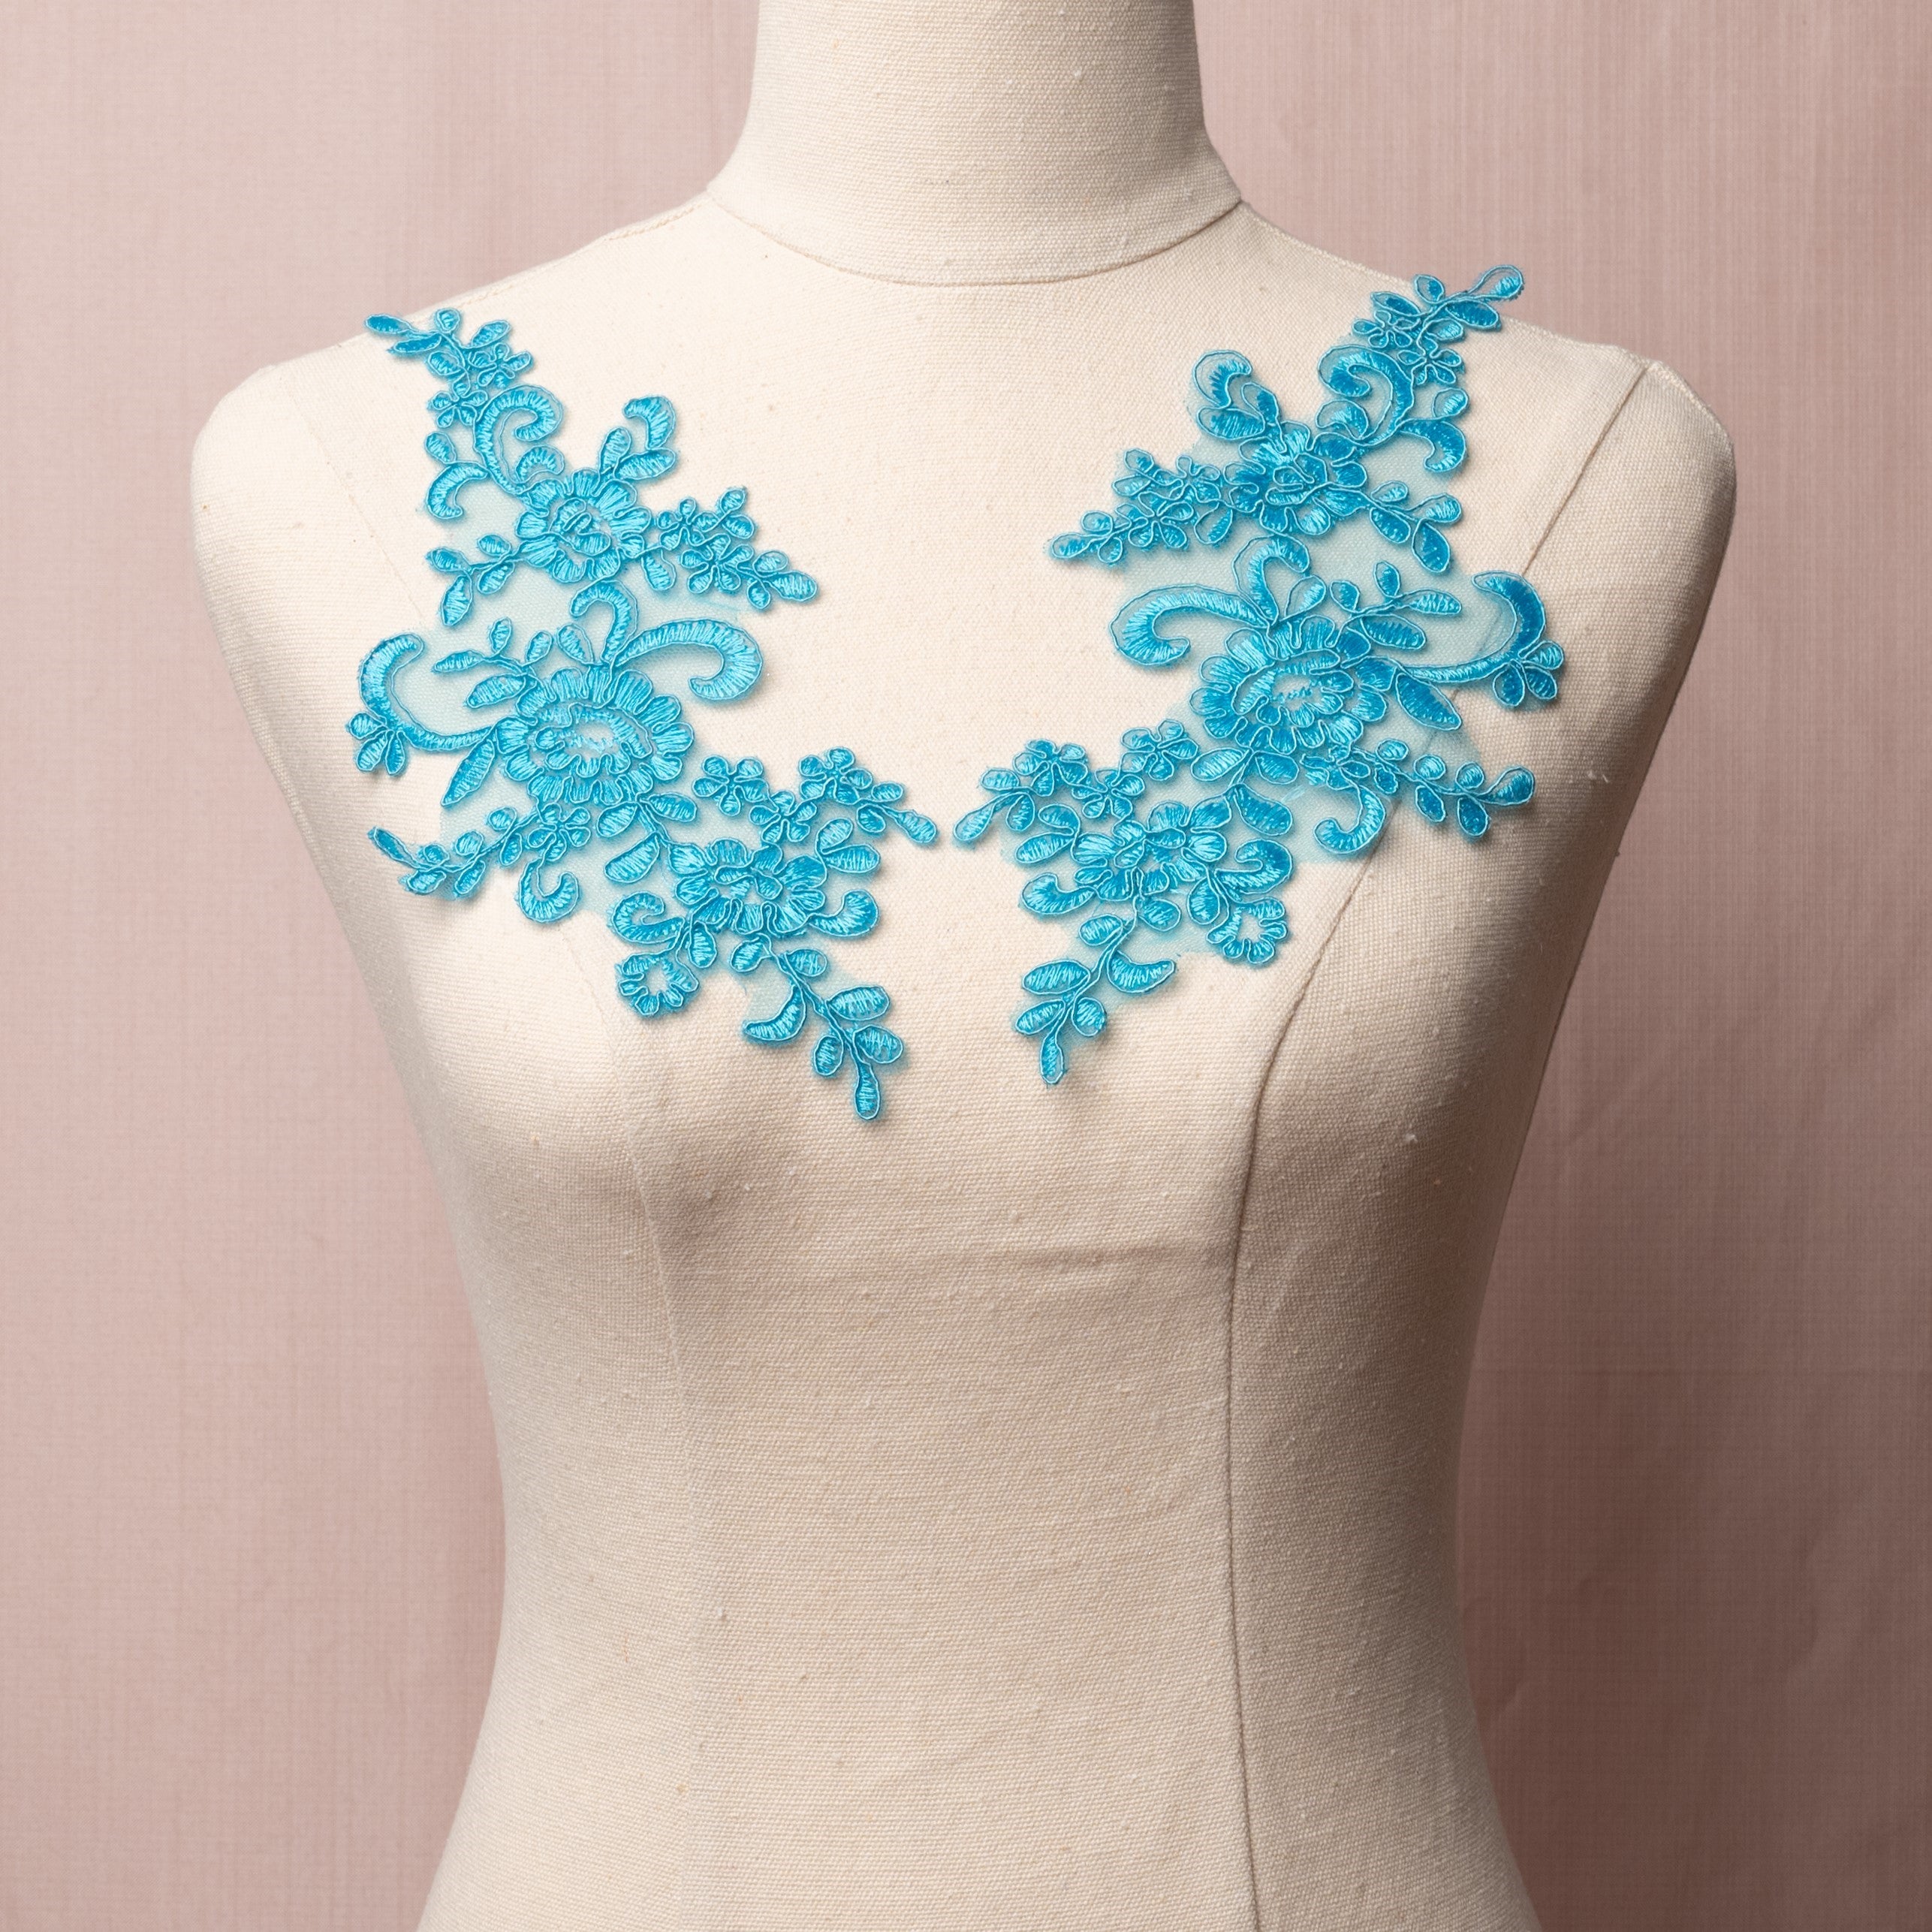 Lake blue floral corded applique pair embroidered onto a fine net backing.  The appliques are displayed on a mannequin.